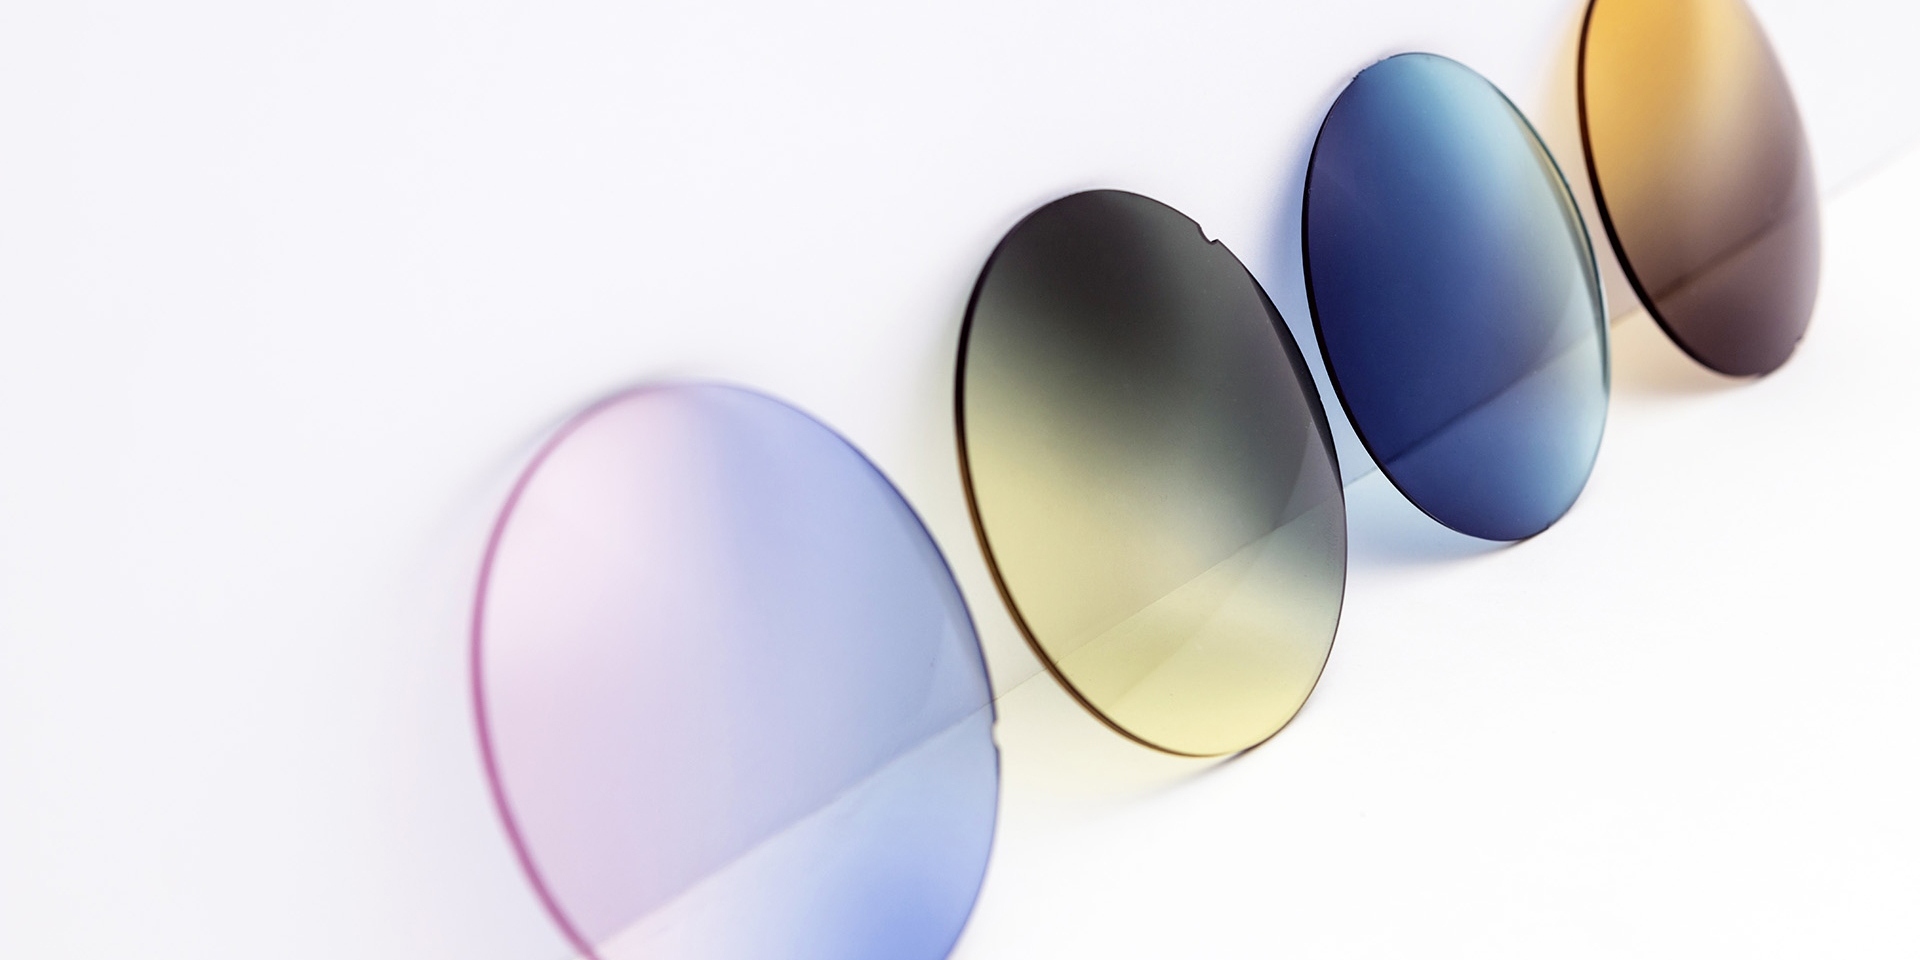 Different colored sunglass lenses leaning against a white surface: pink-purple, yellow-gray, blue and brown gradients.